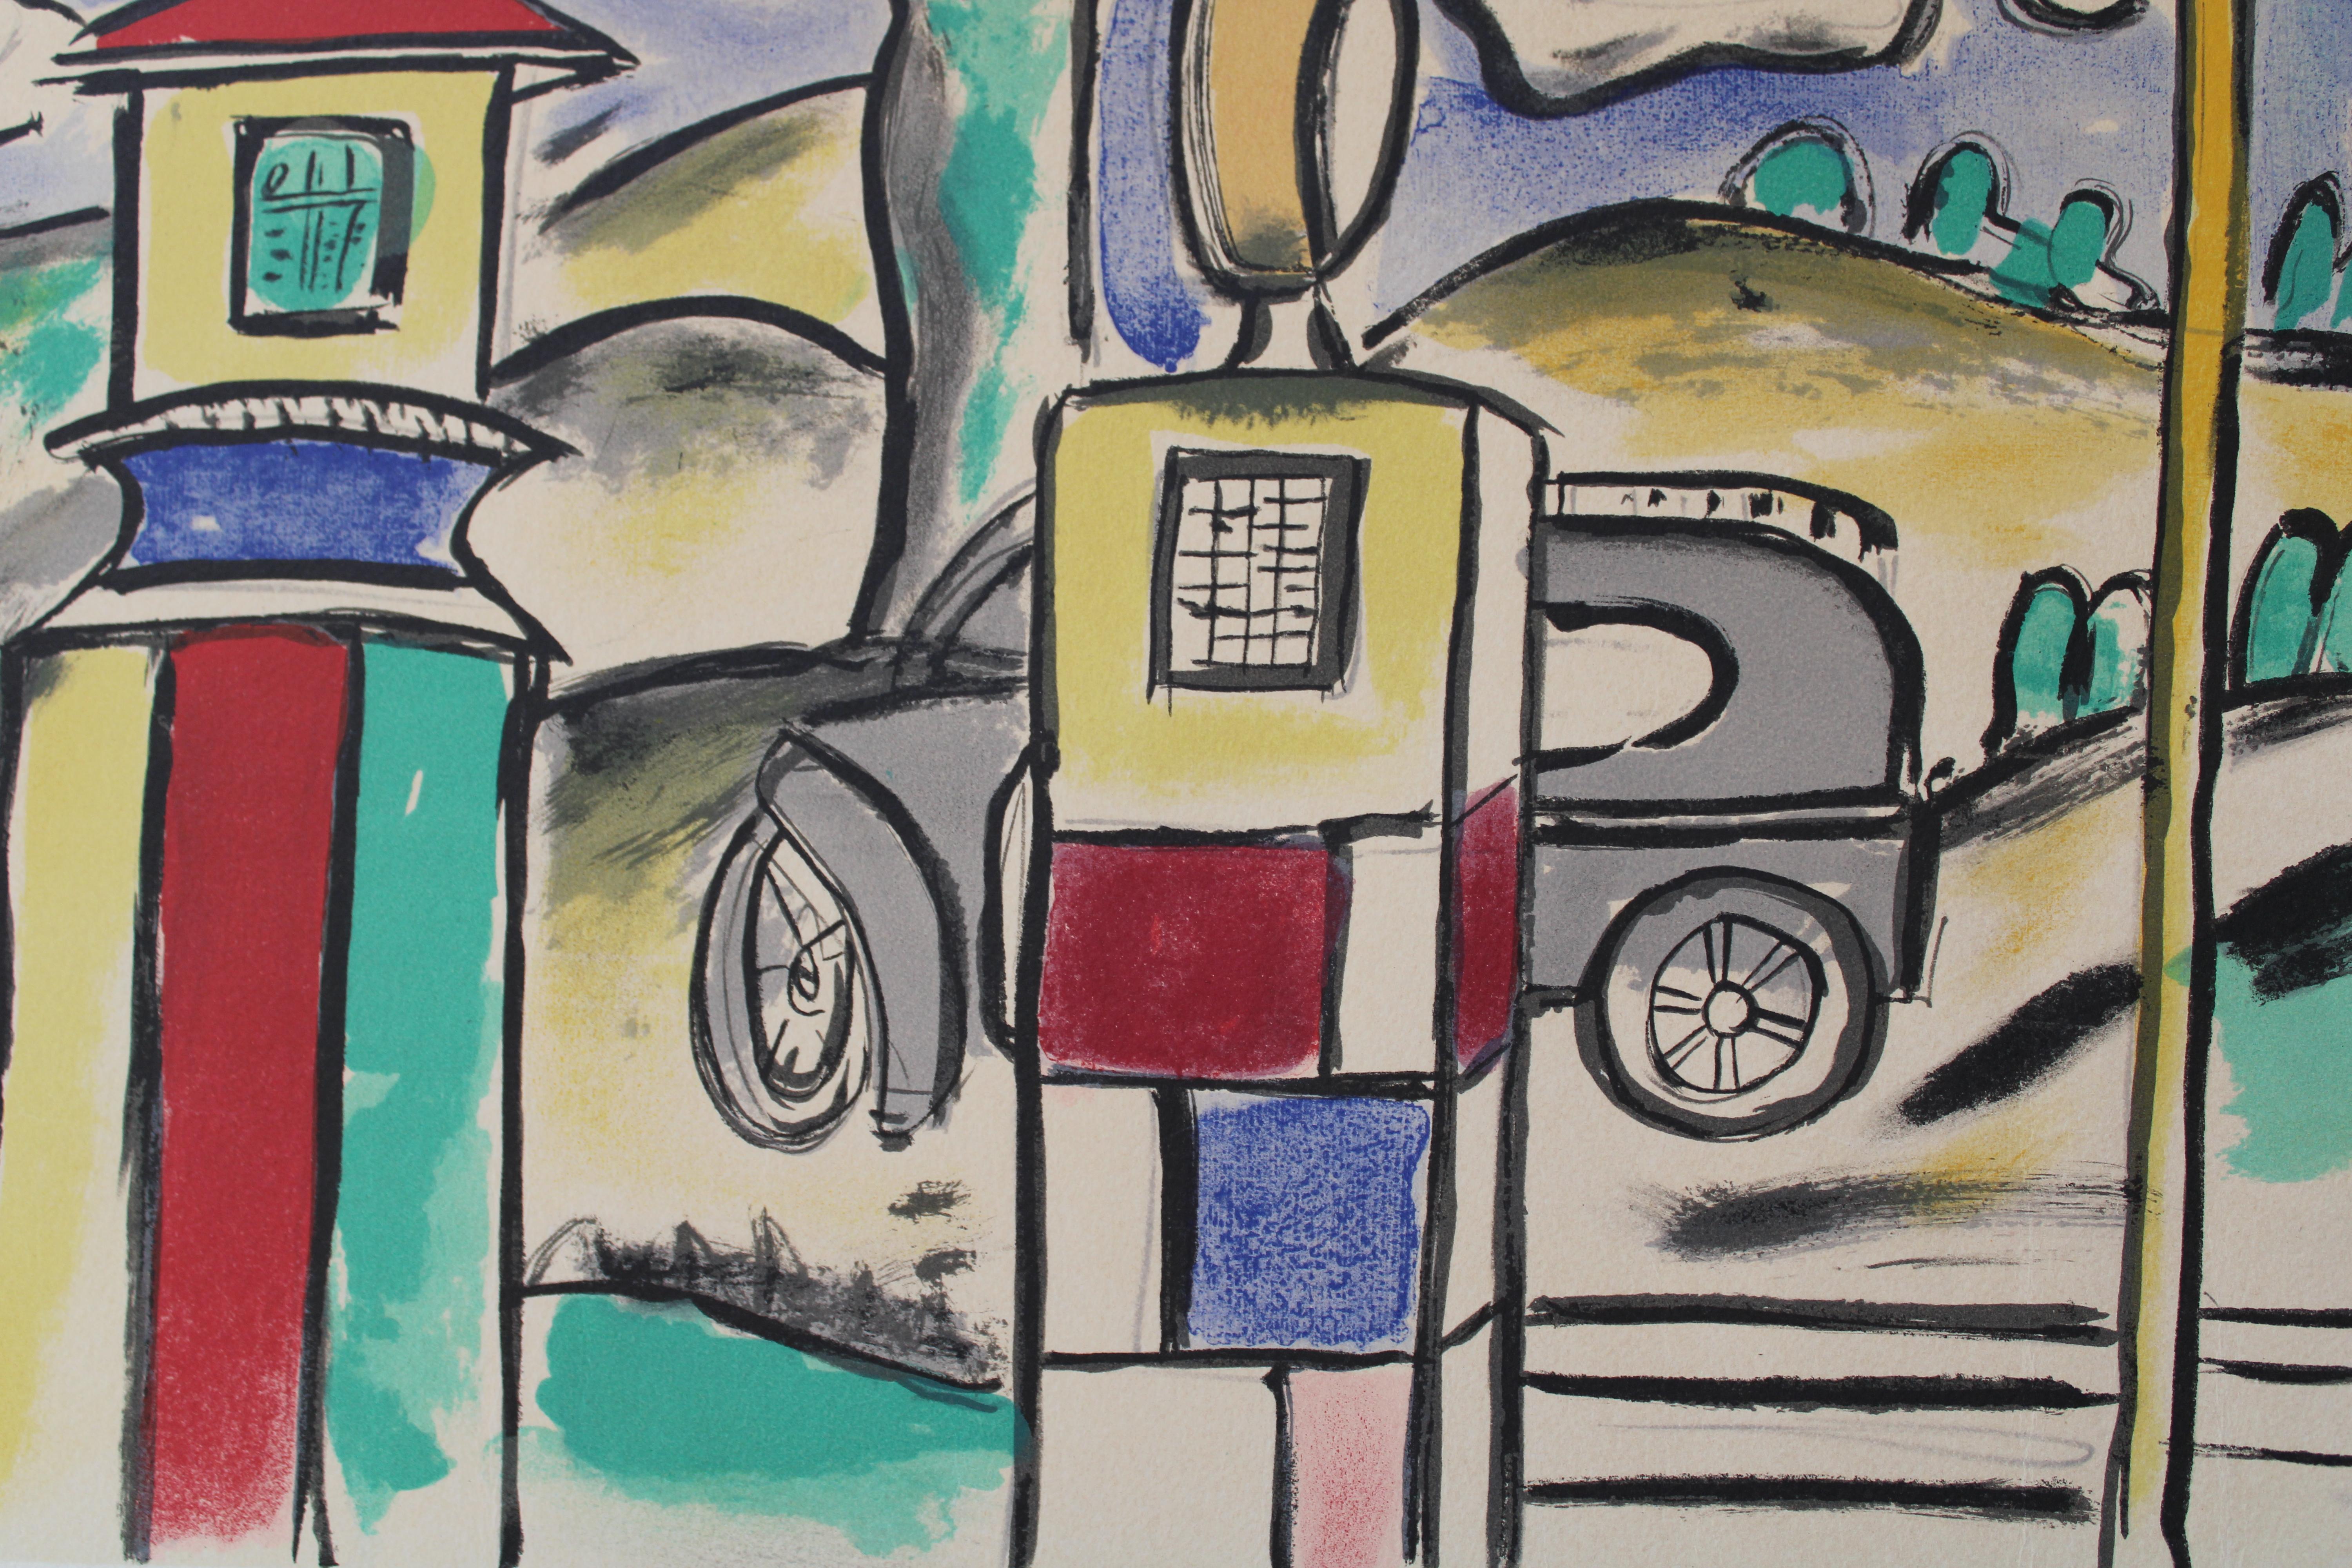 The petrol station, The etude for the city Paper, lithograph 2/300, 34x45cm - Print by Fernand Léger